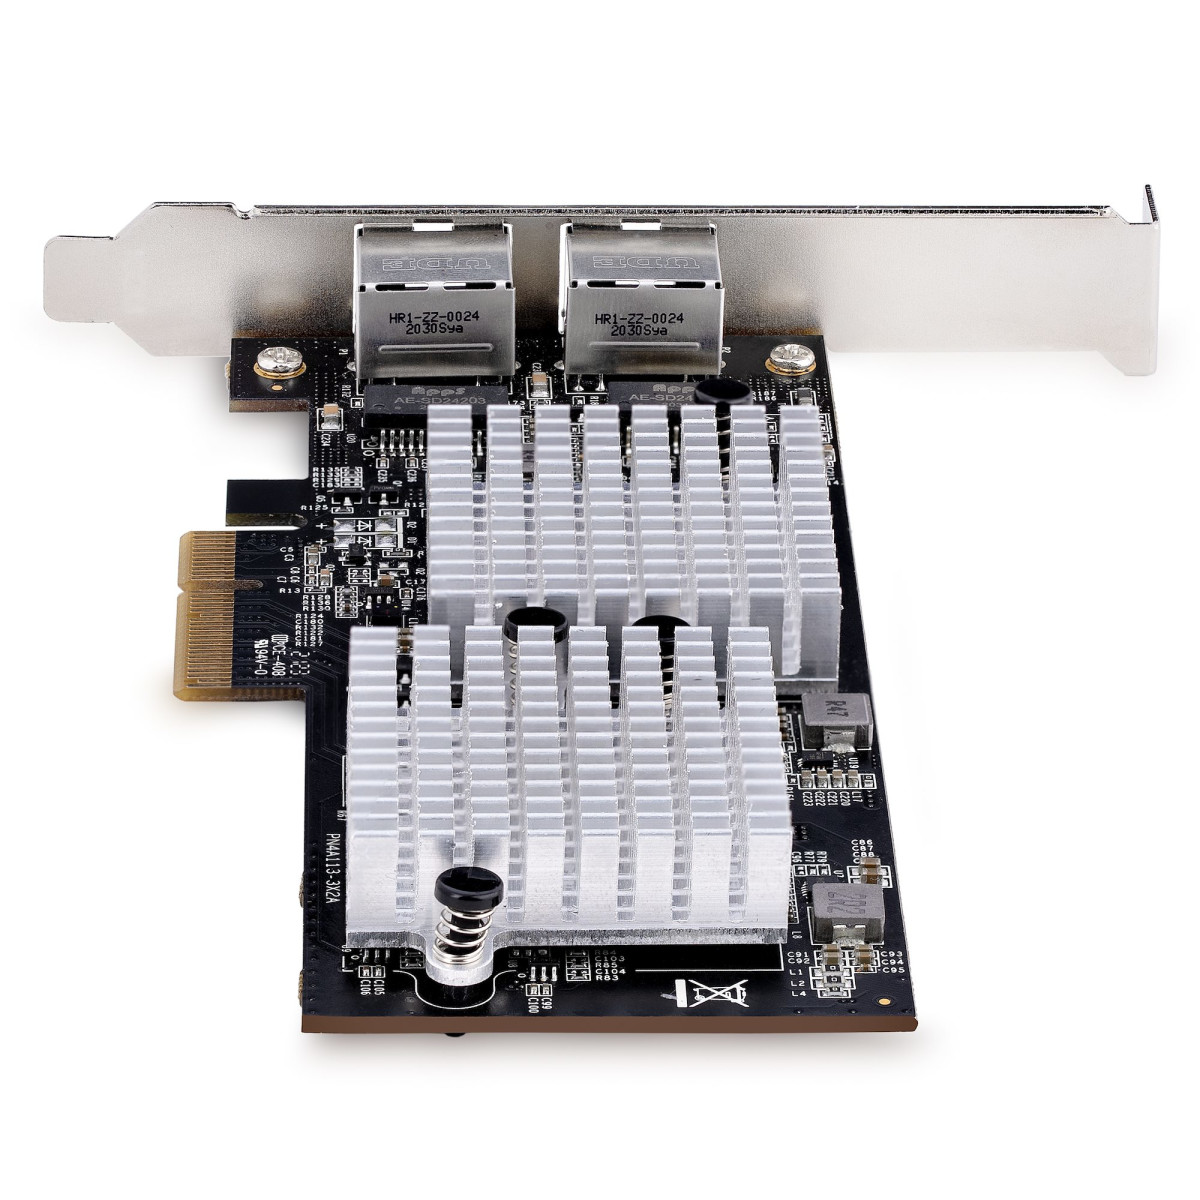 2-Port 10Gbps PCIe Network Adapter Card